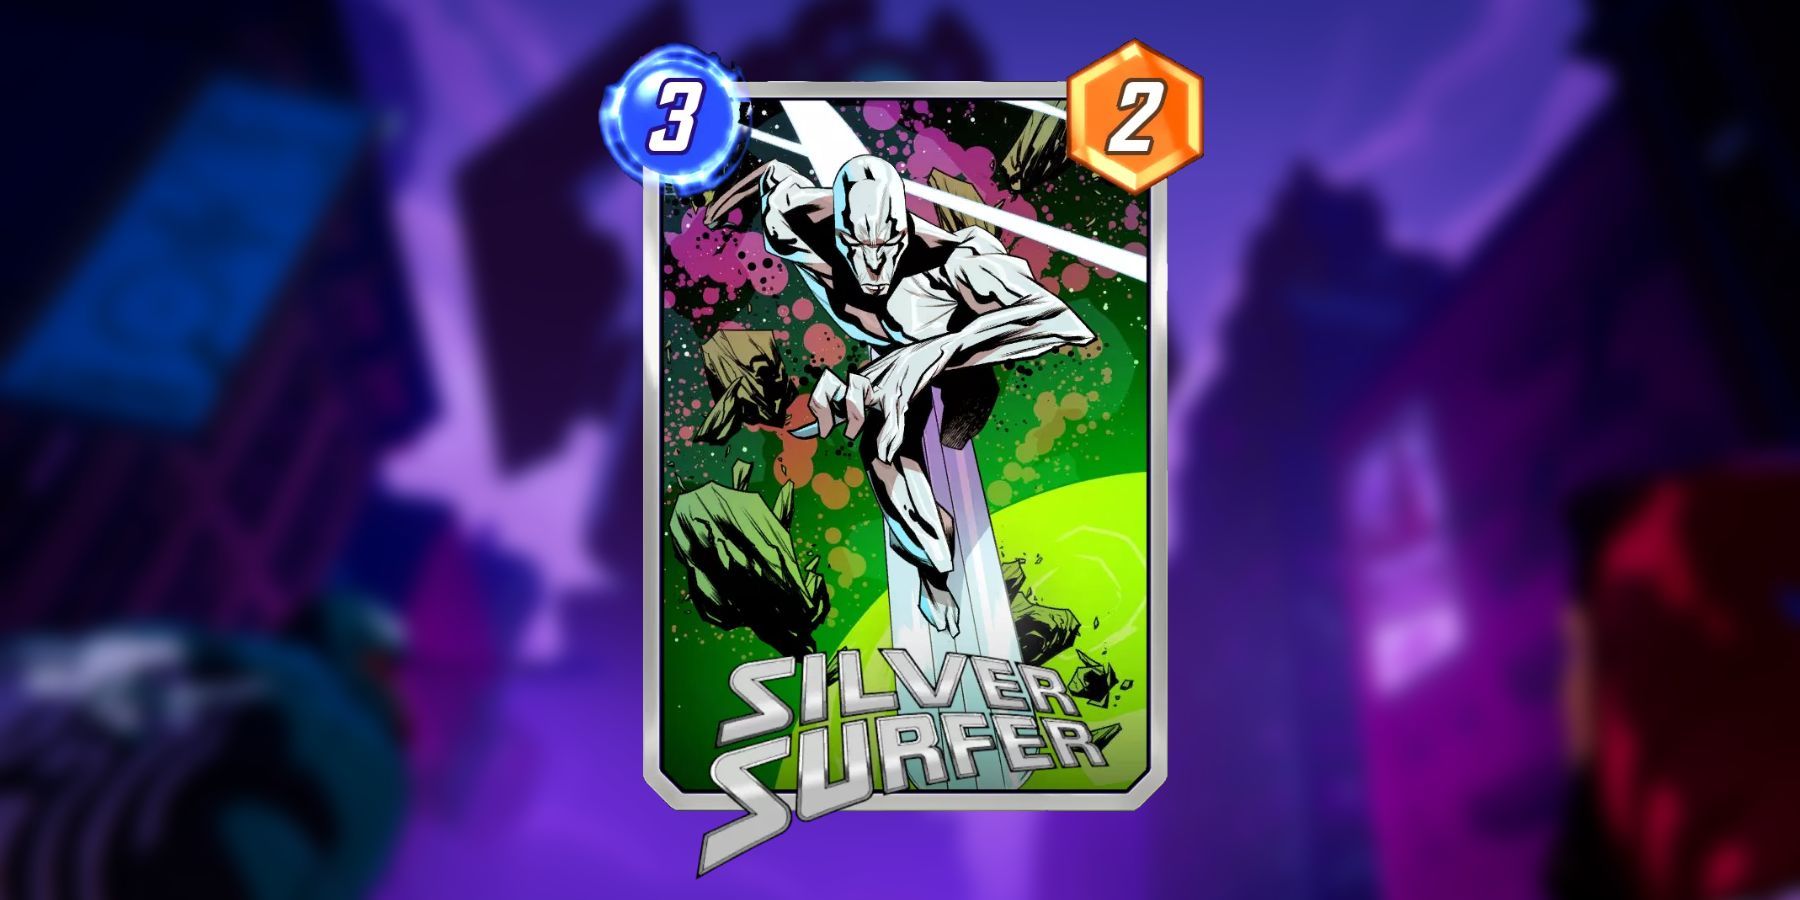 image showing the silver surfer card in marvel snap.